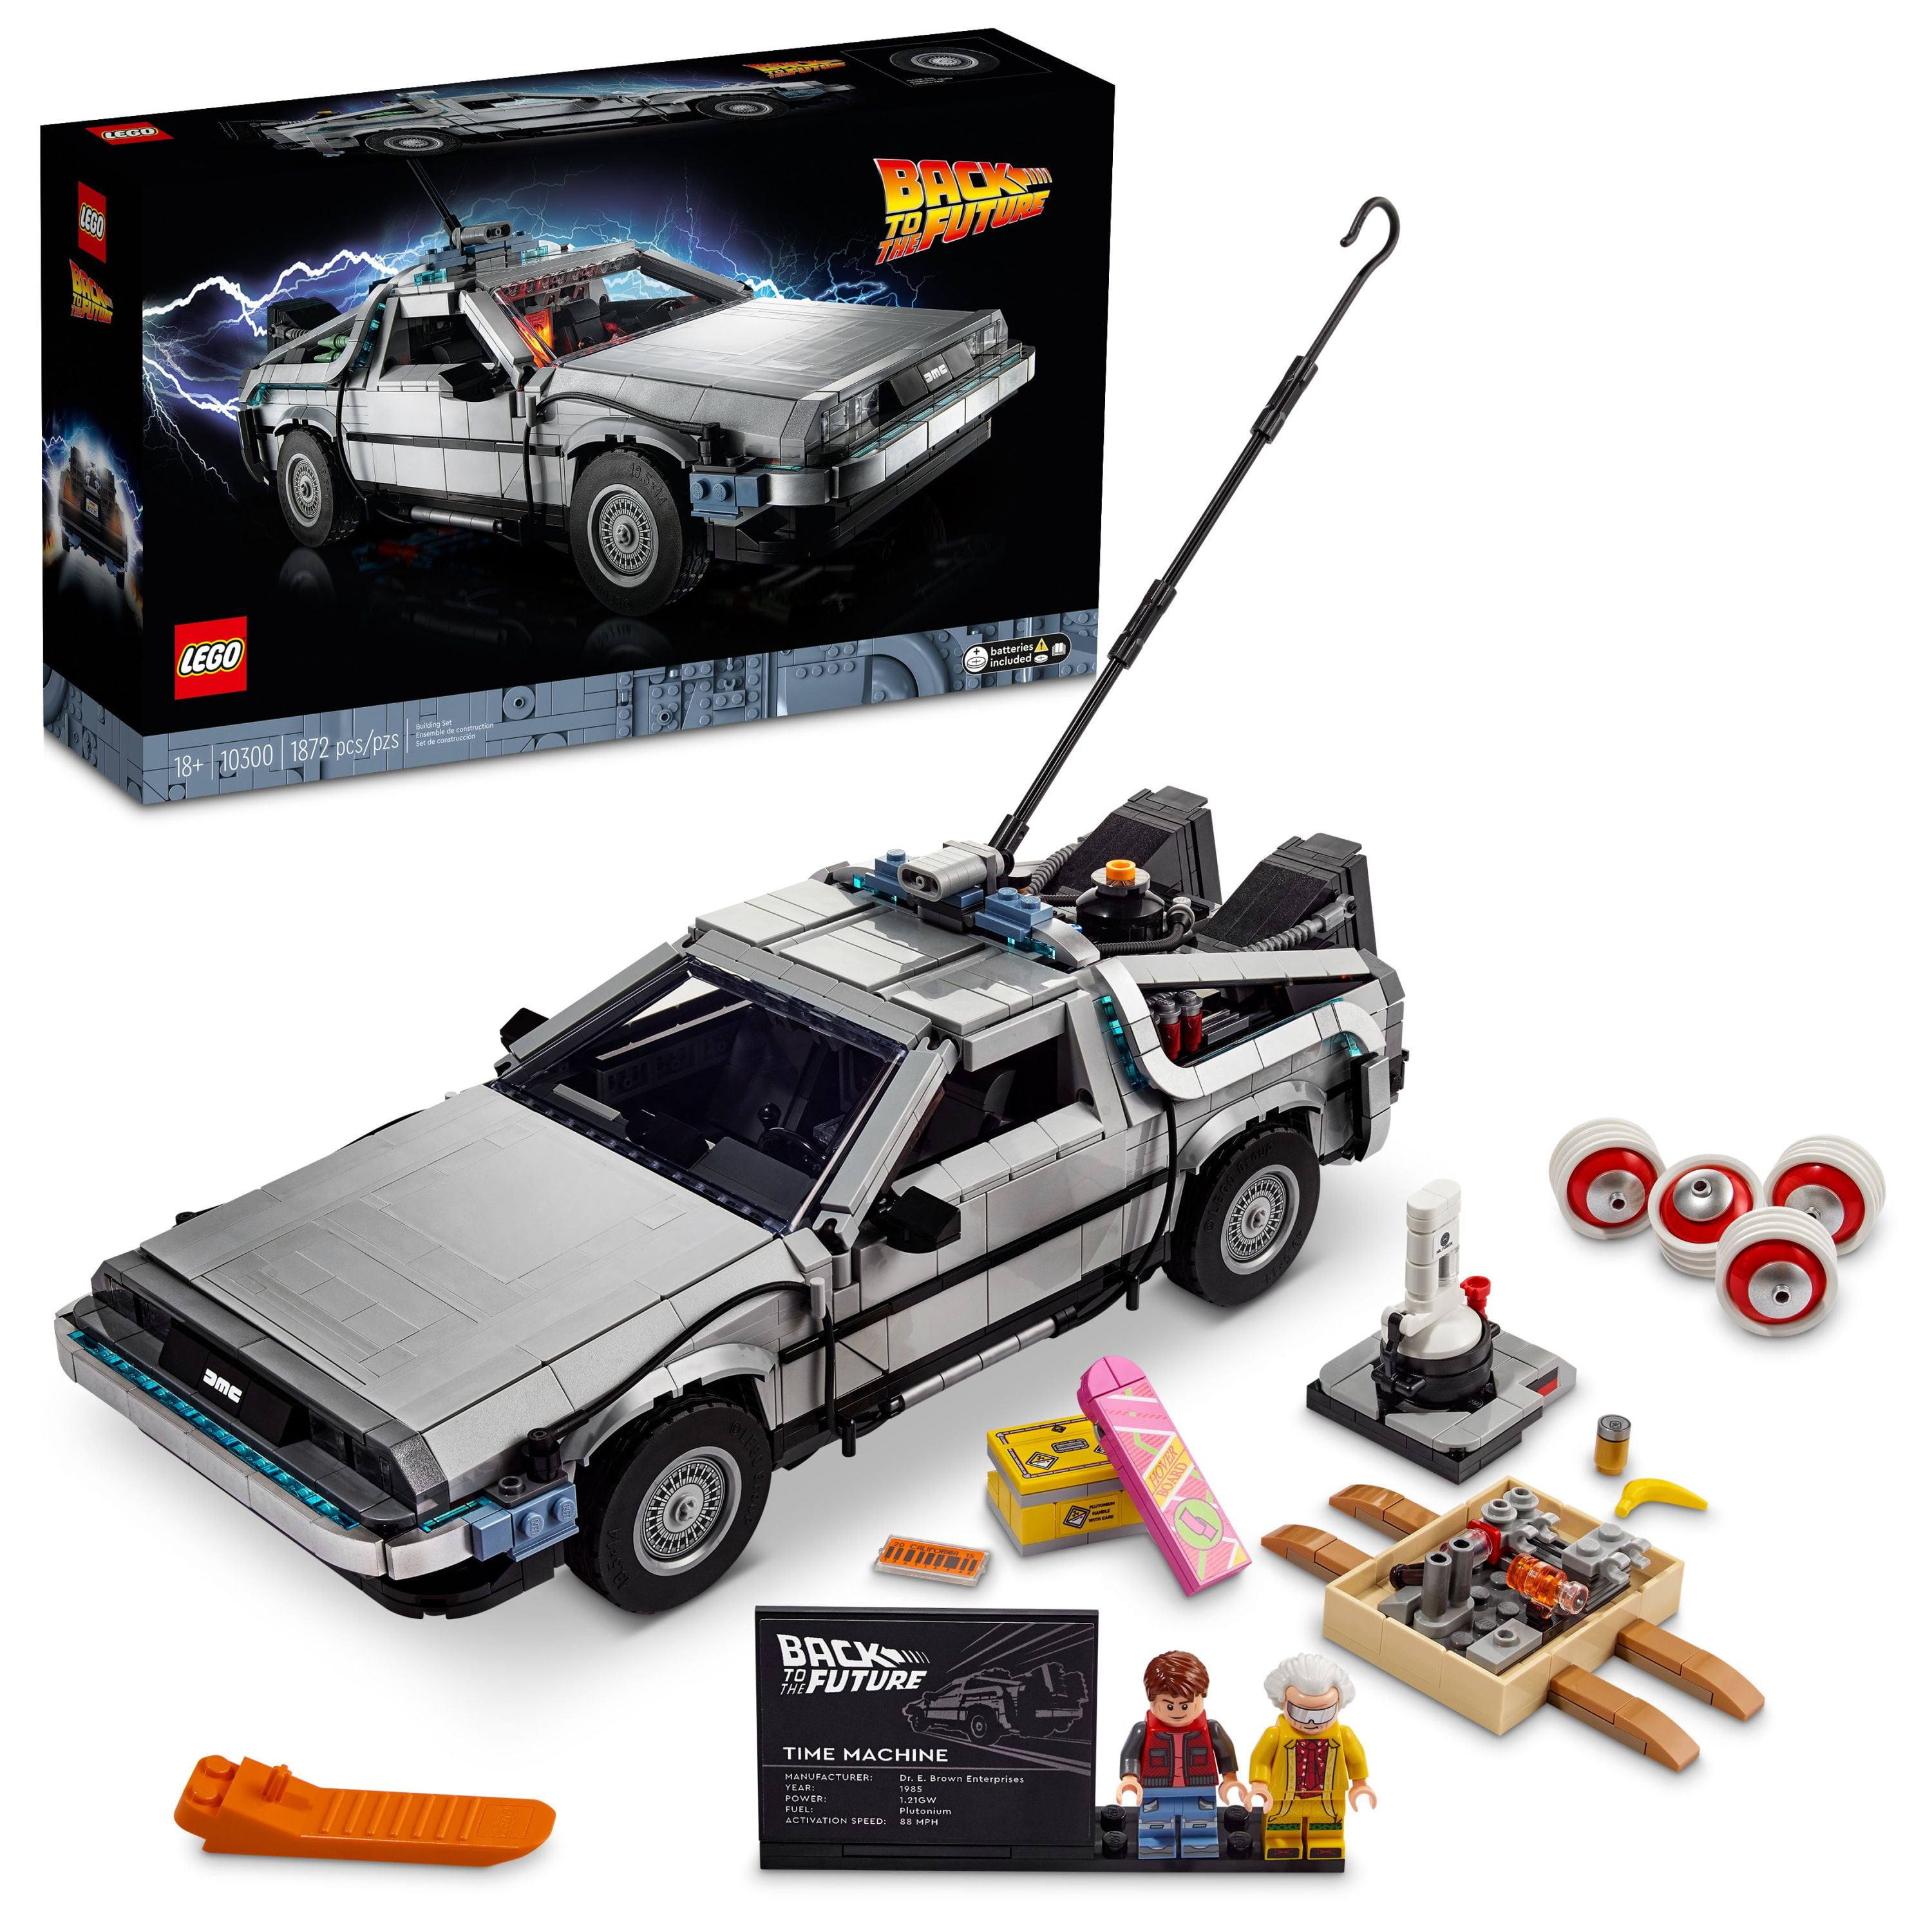 LEGO Icons Back to the Future Time Machine 10300, Model Car Building ...